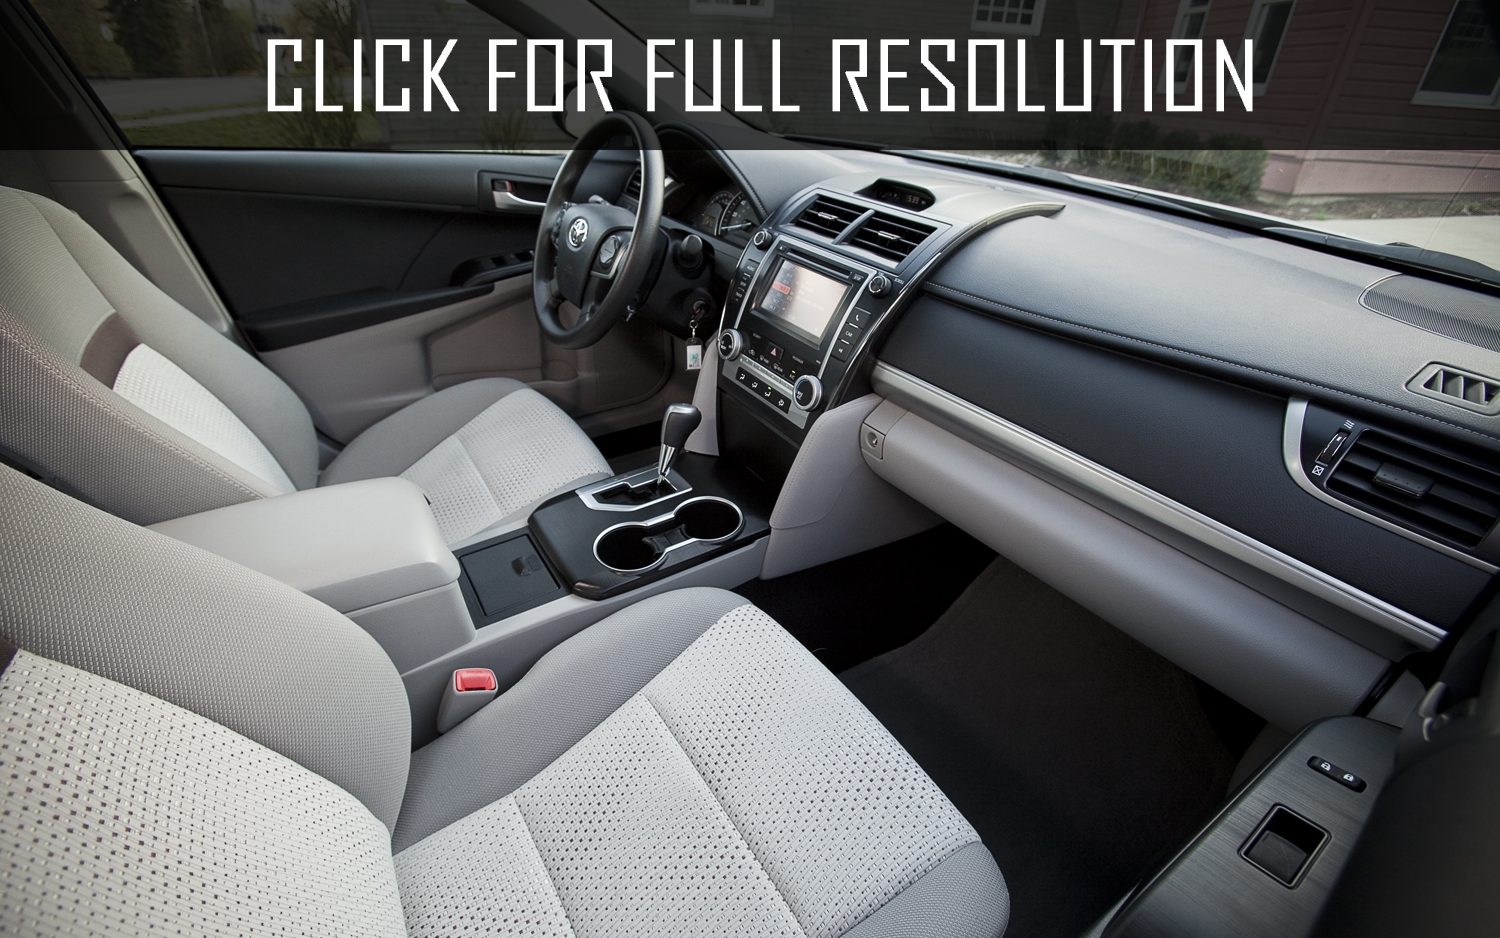 2012 Toyota Camry V8 Best Image Gallery 4 15 Share And